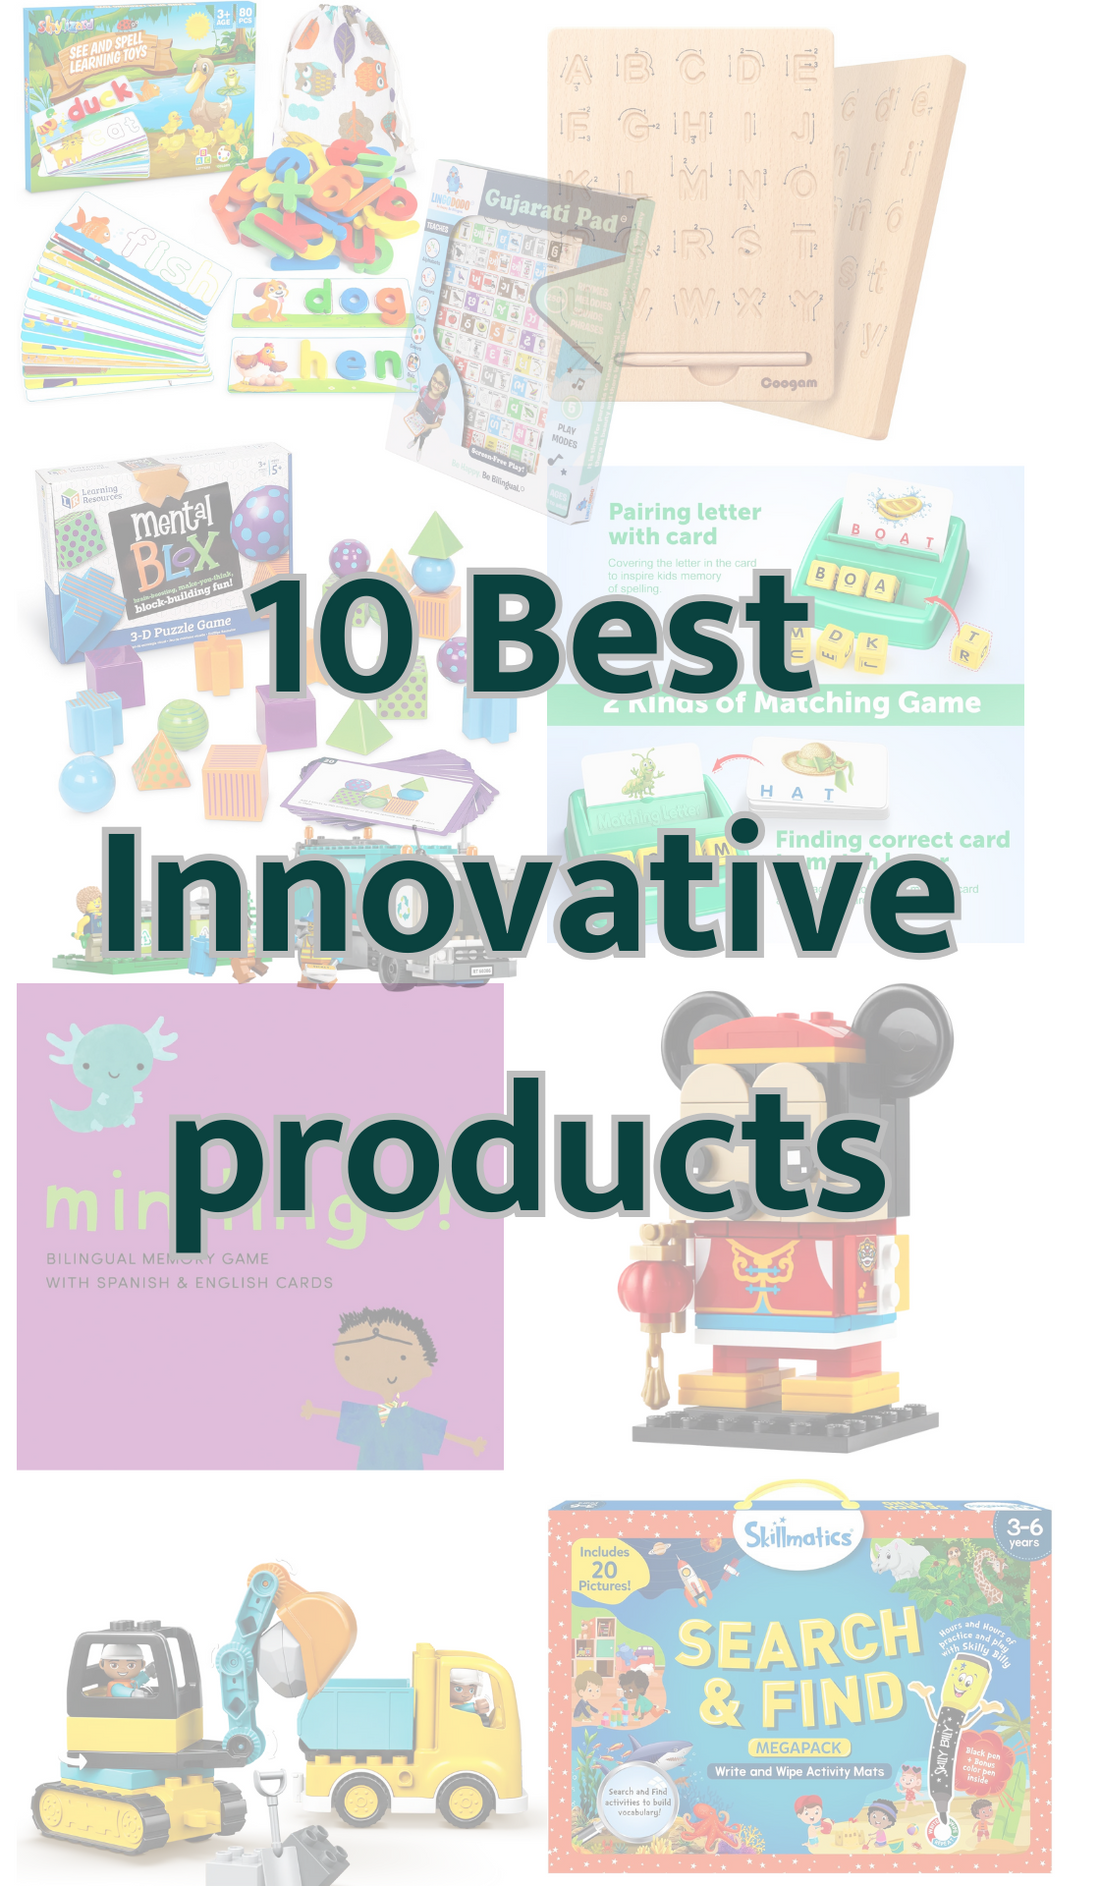 The Best Innovative Products for Educational Learning